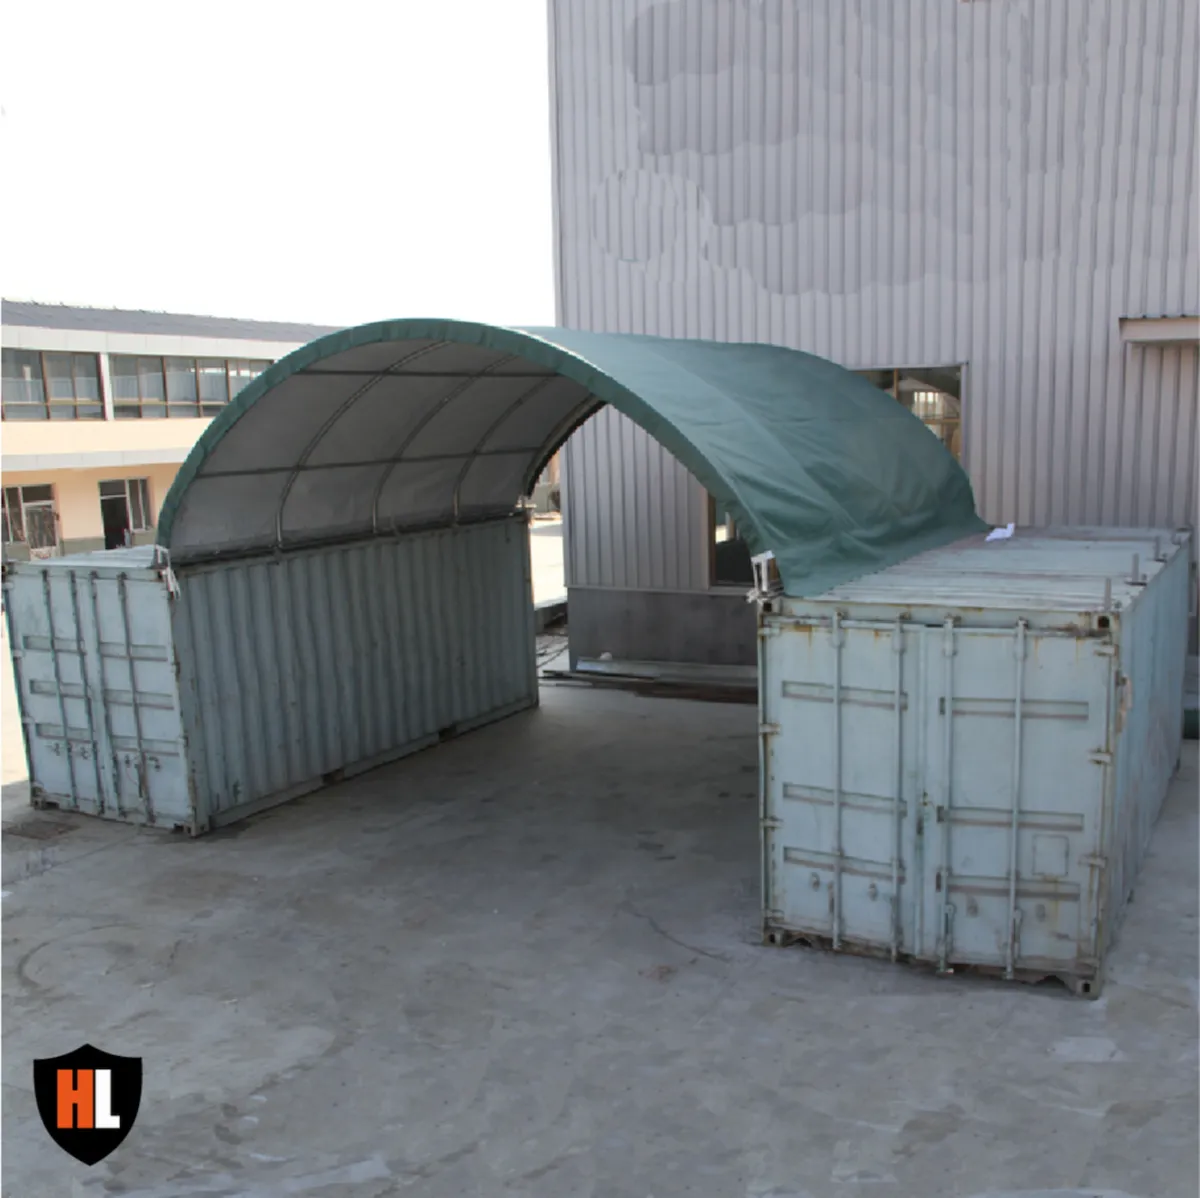 C2020 (Military Green) Container Shelter